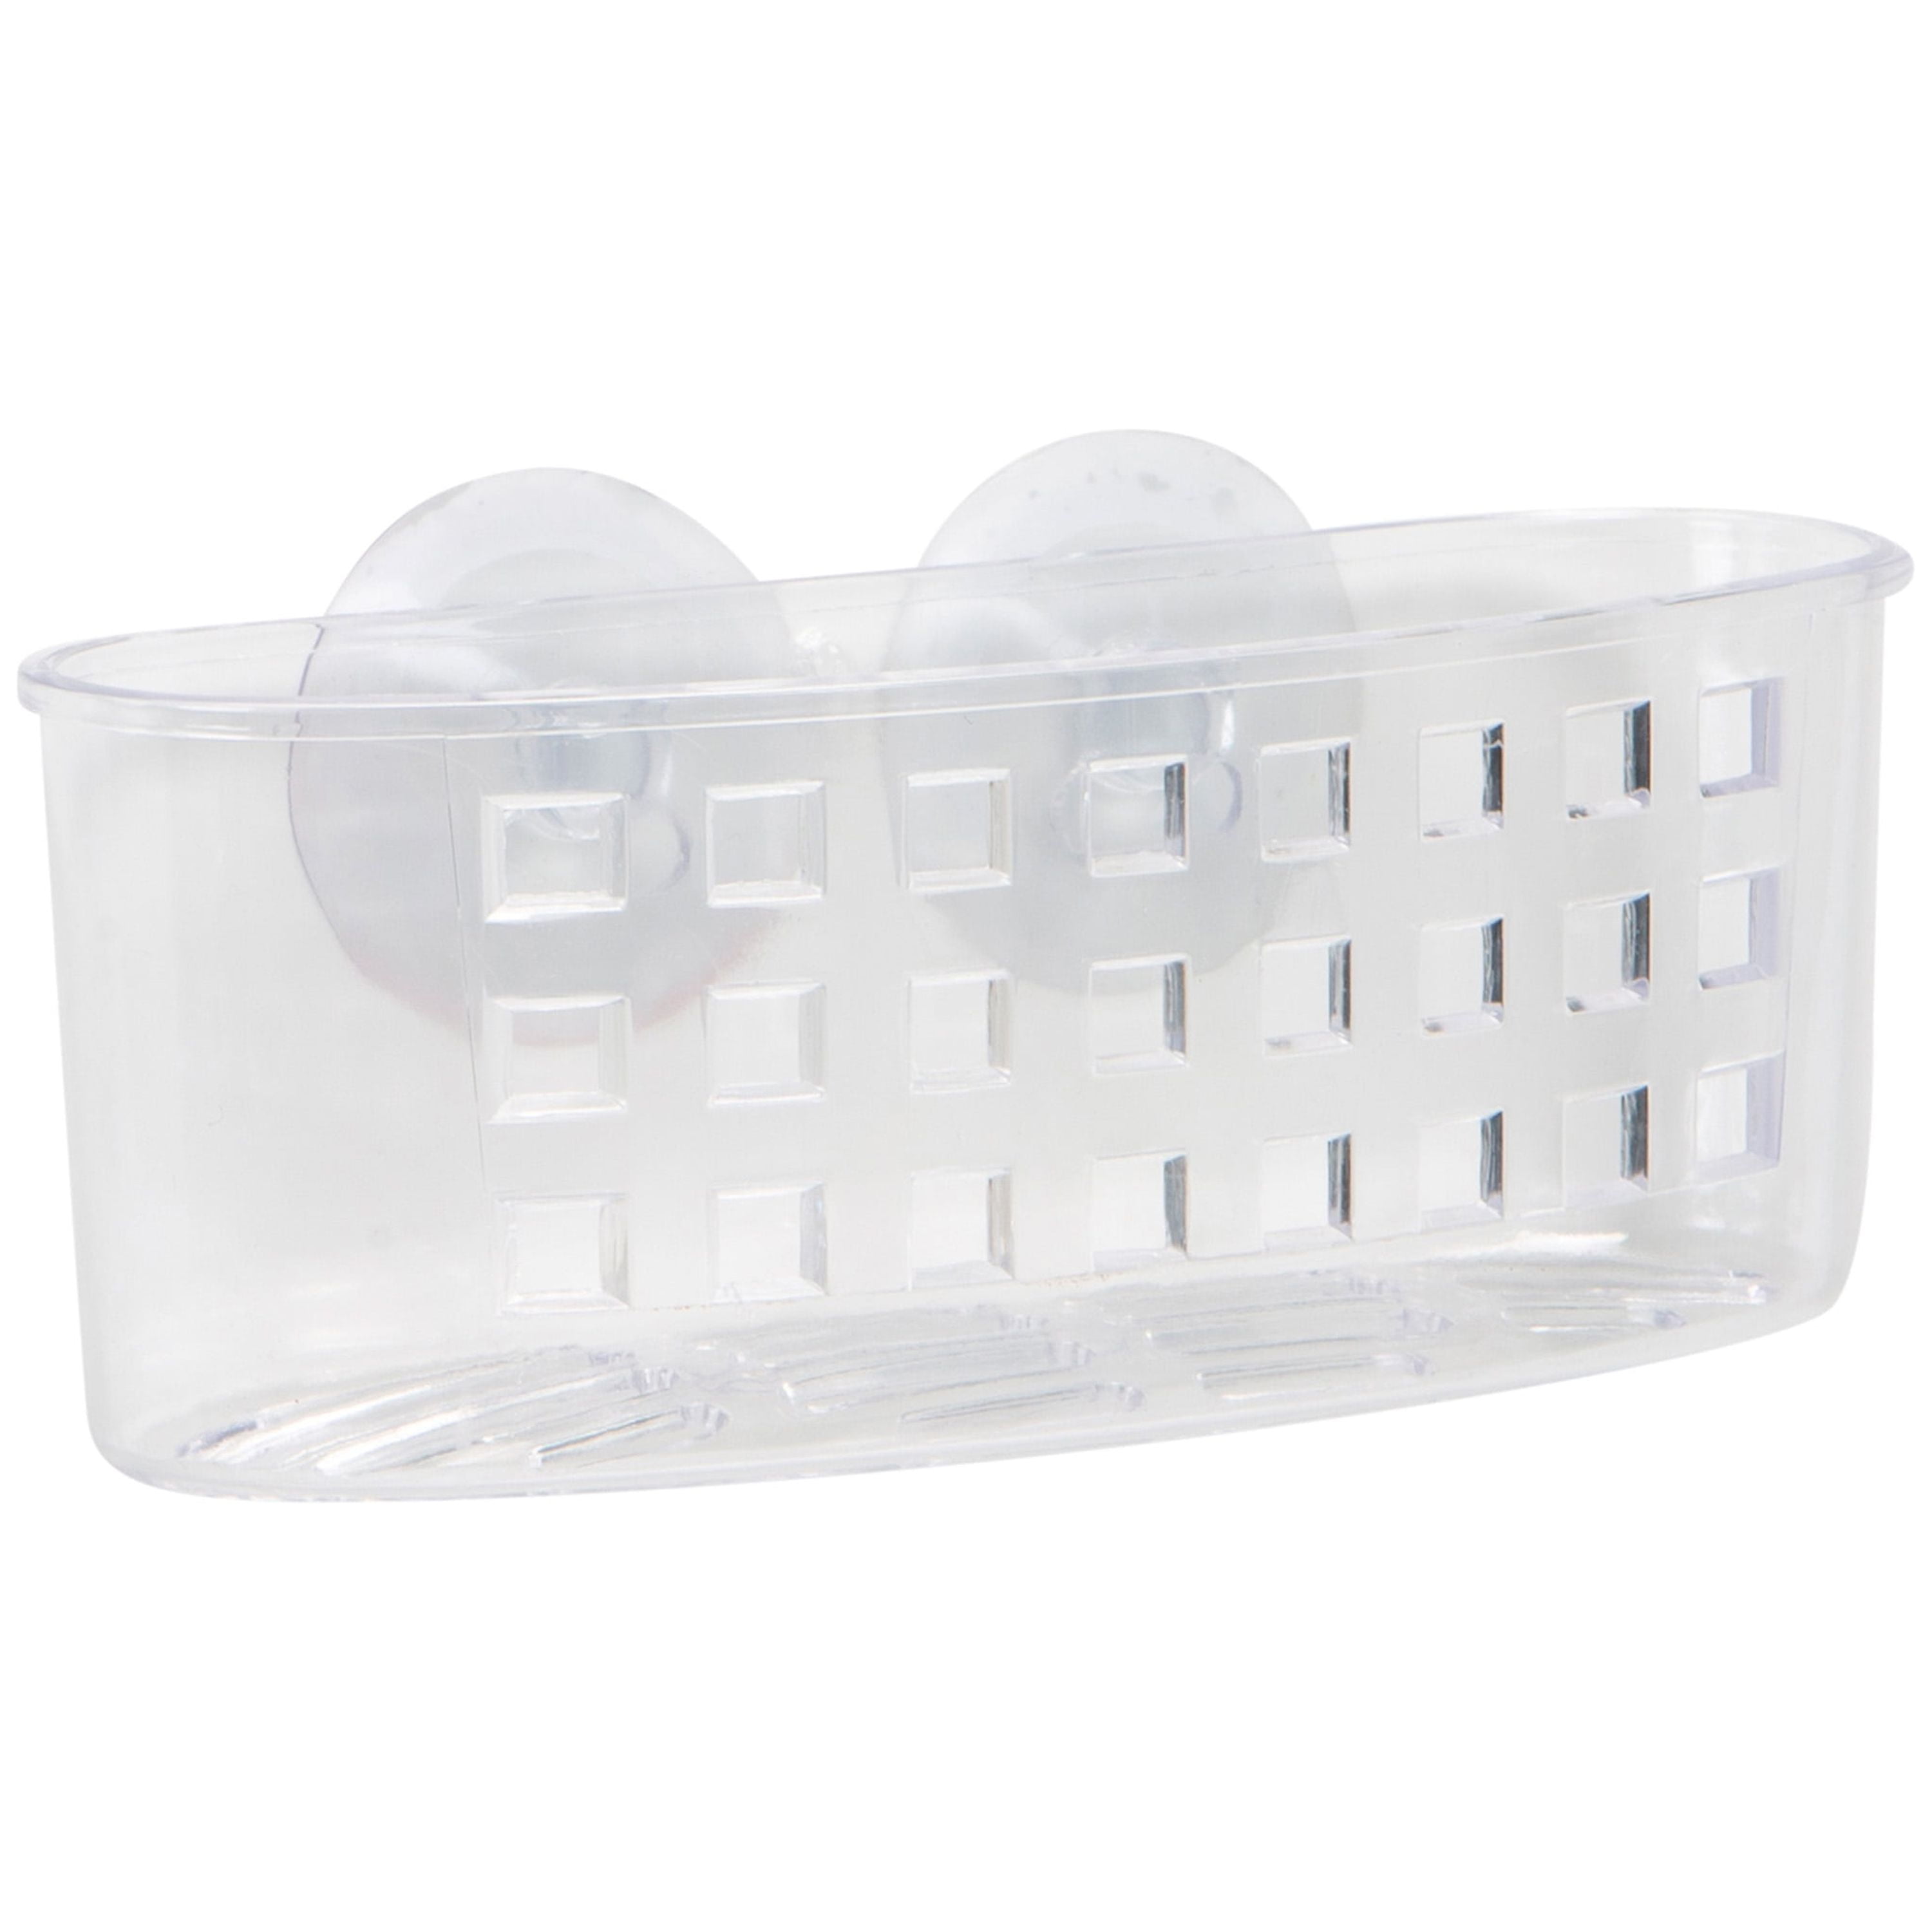 On the Dot Suction Shower Basket Caddy Gray - Slipx Solutions